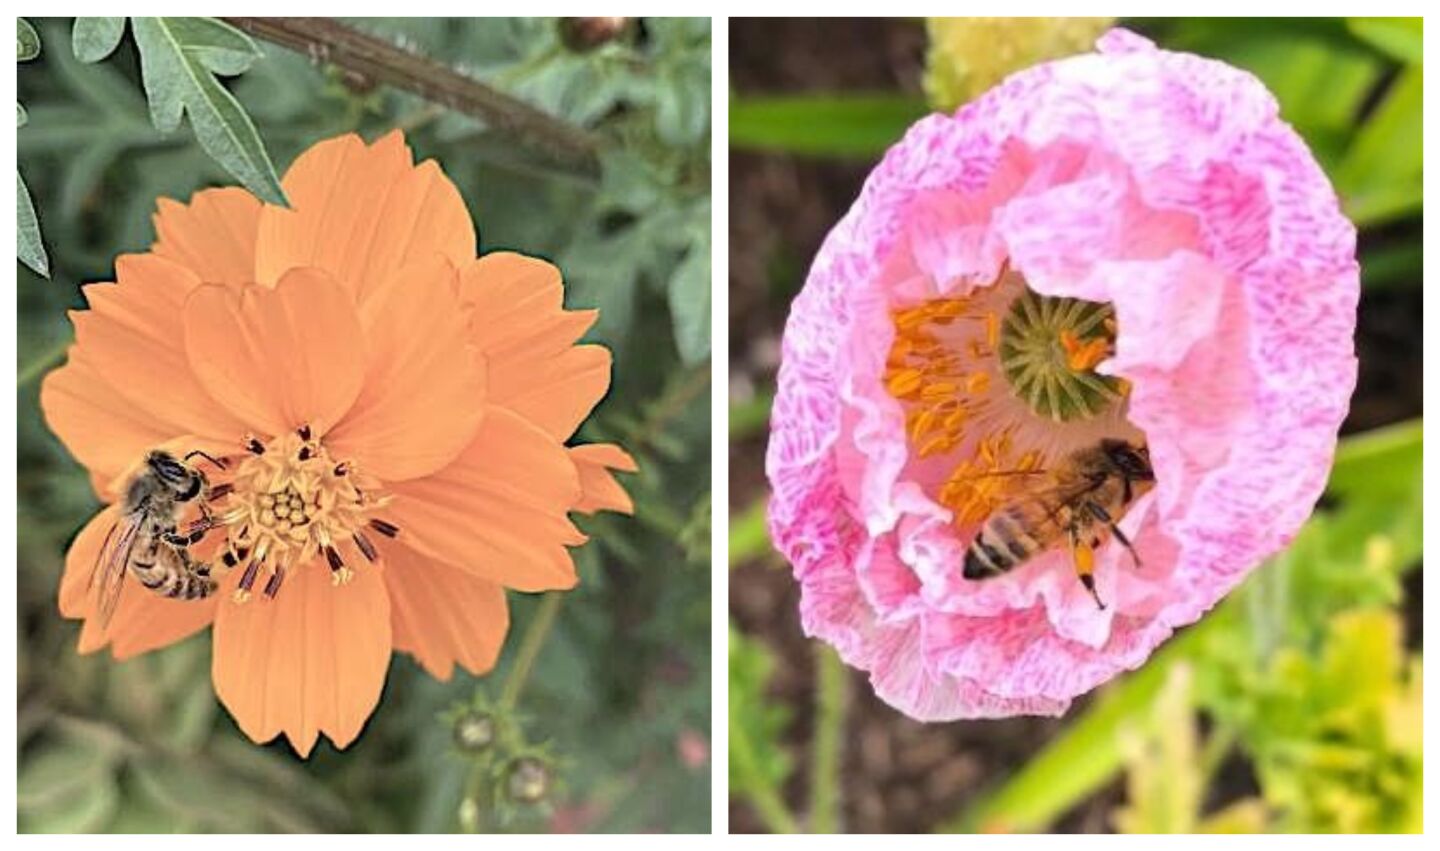 Busy bees get to work on colorful flowers.